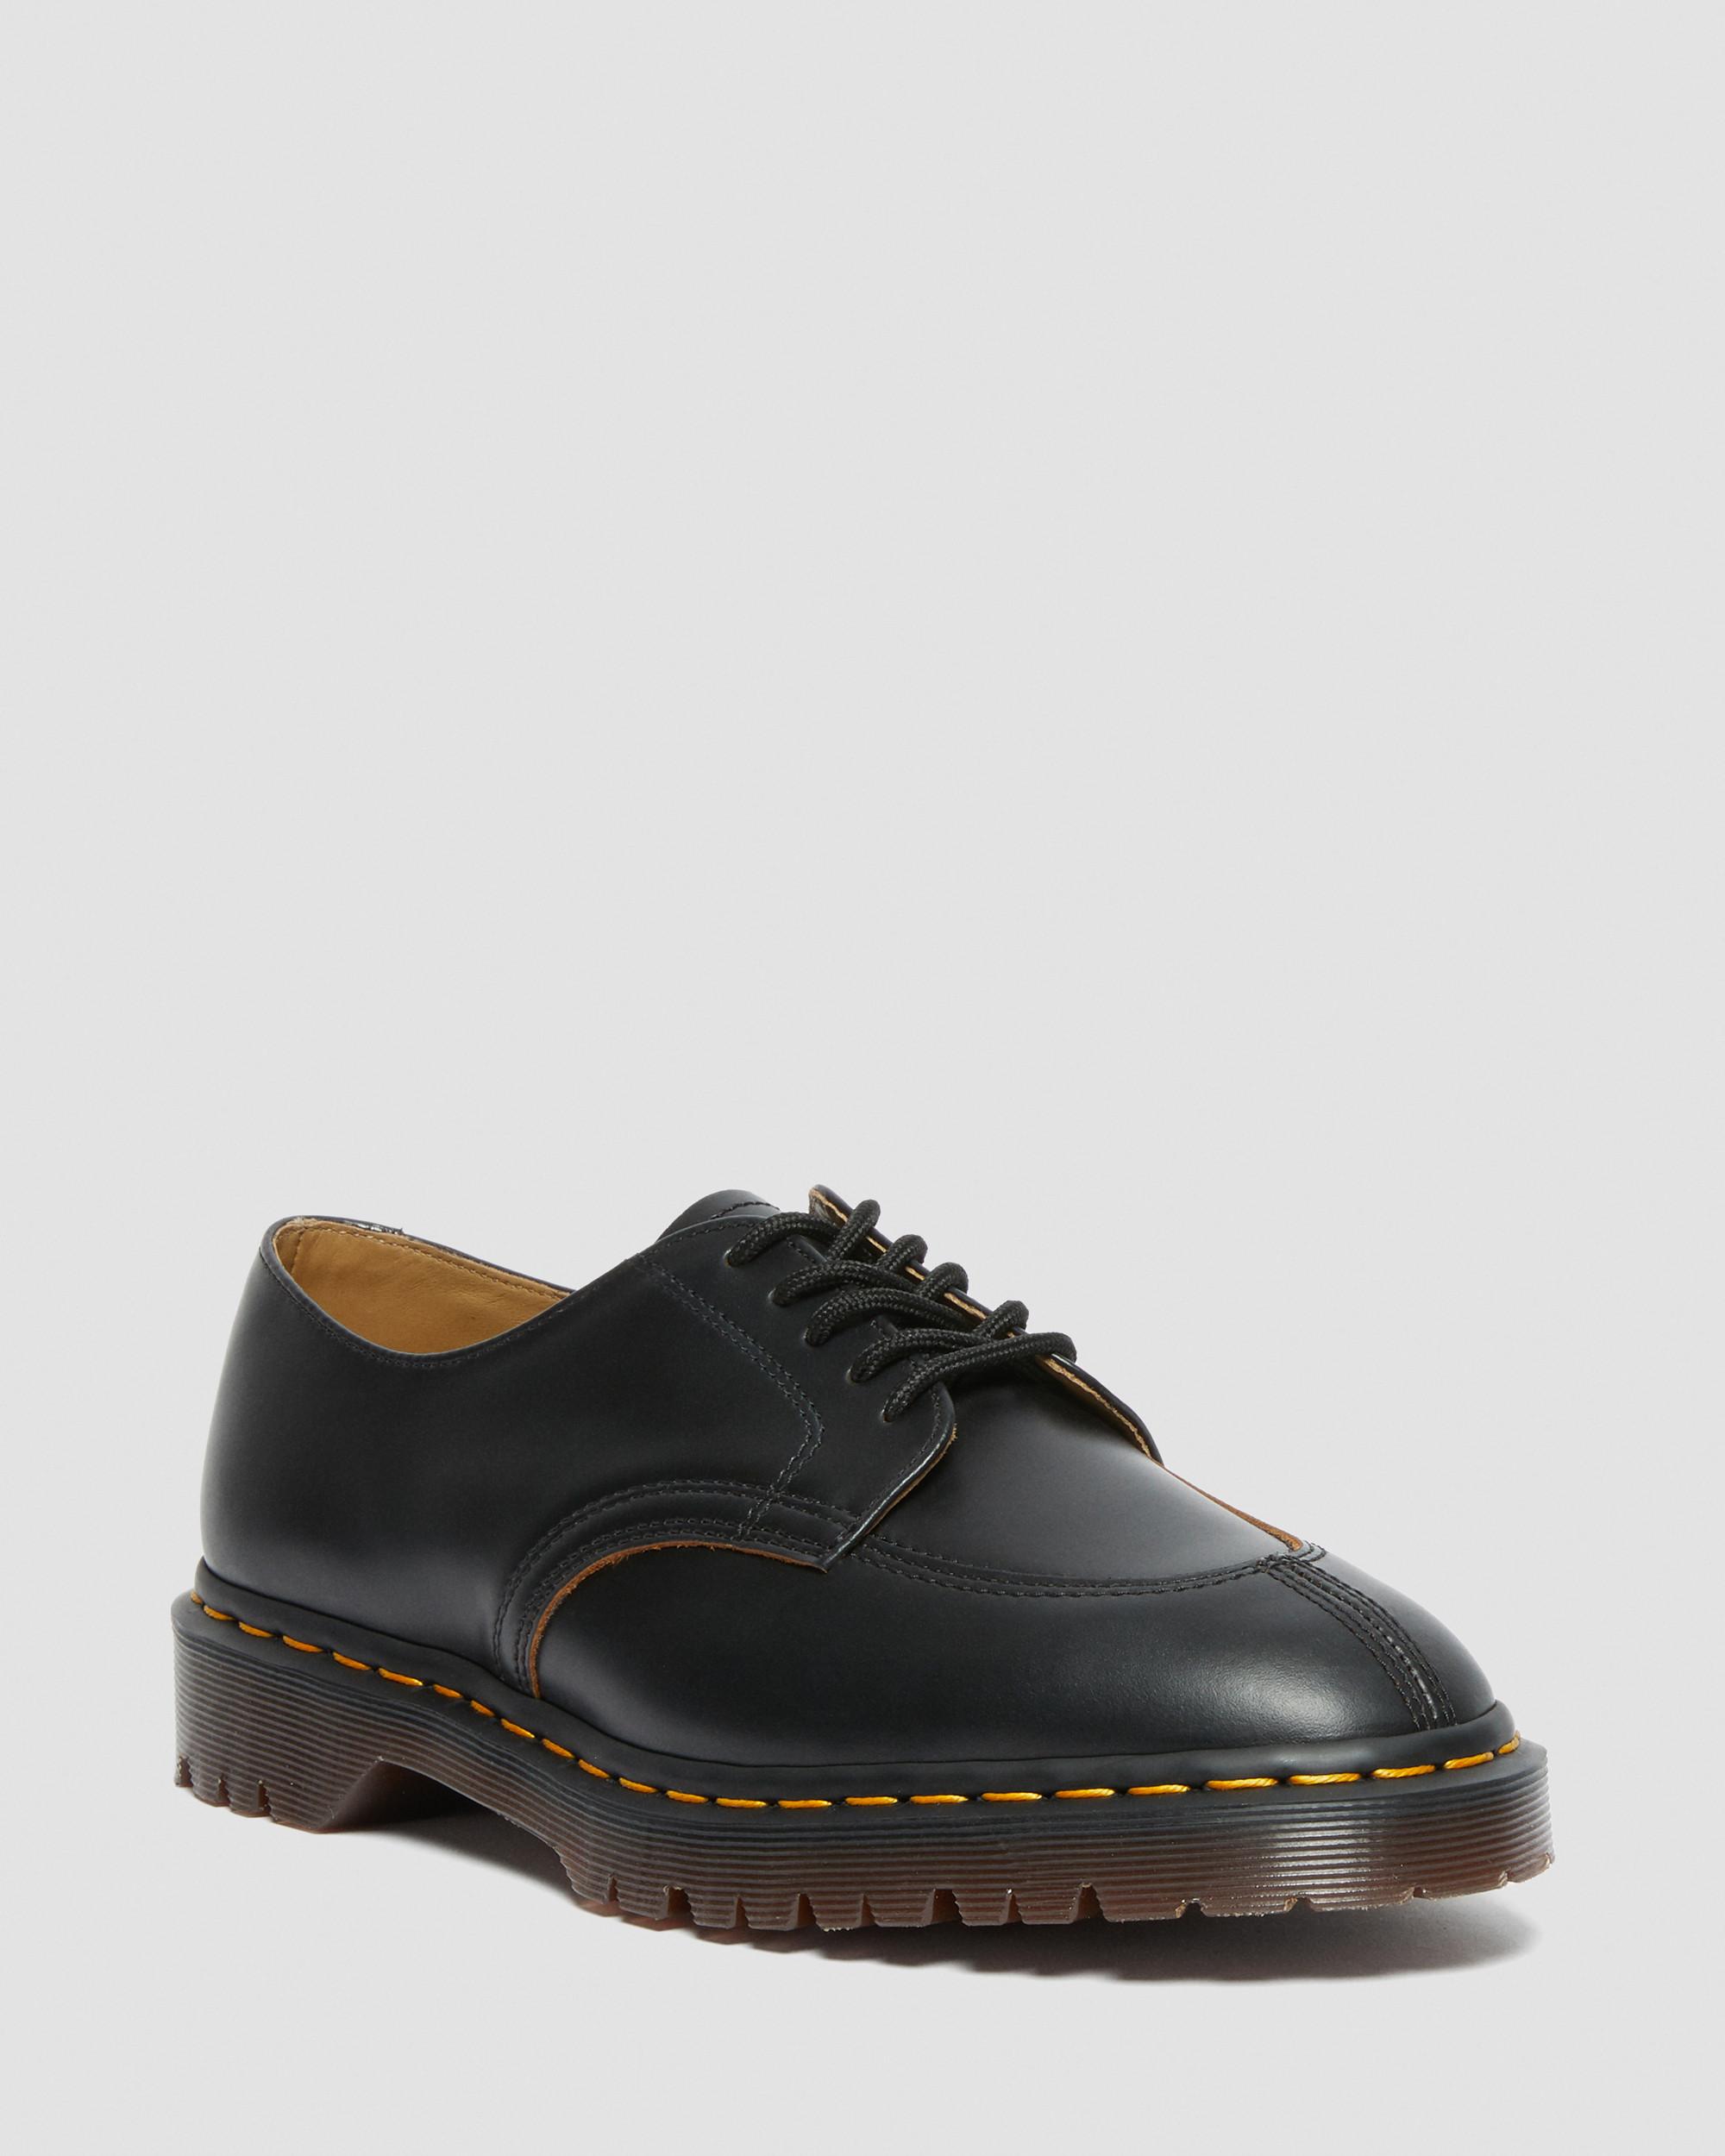 Martens Leather Made In England Vintage 2046 Shoe in Black for Men Dr Mens Shoes Lace-ups Oxford shoes 